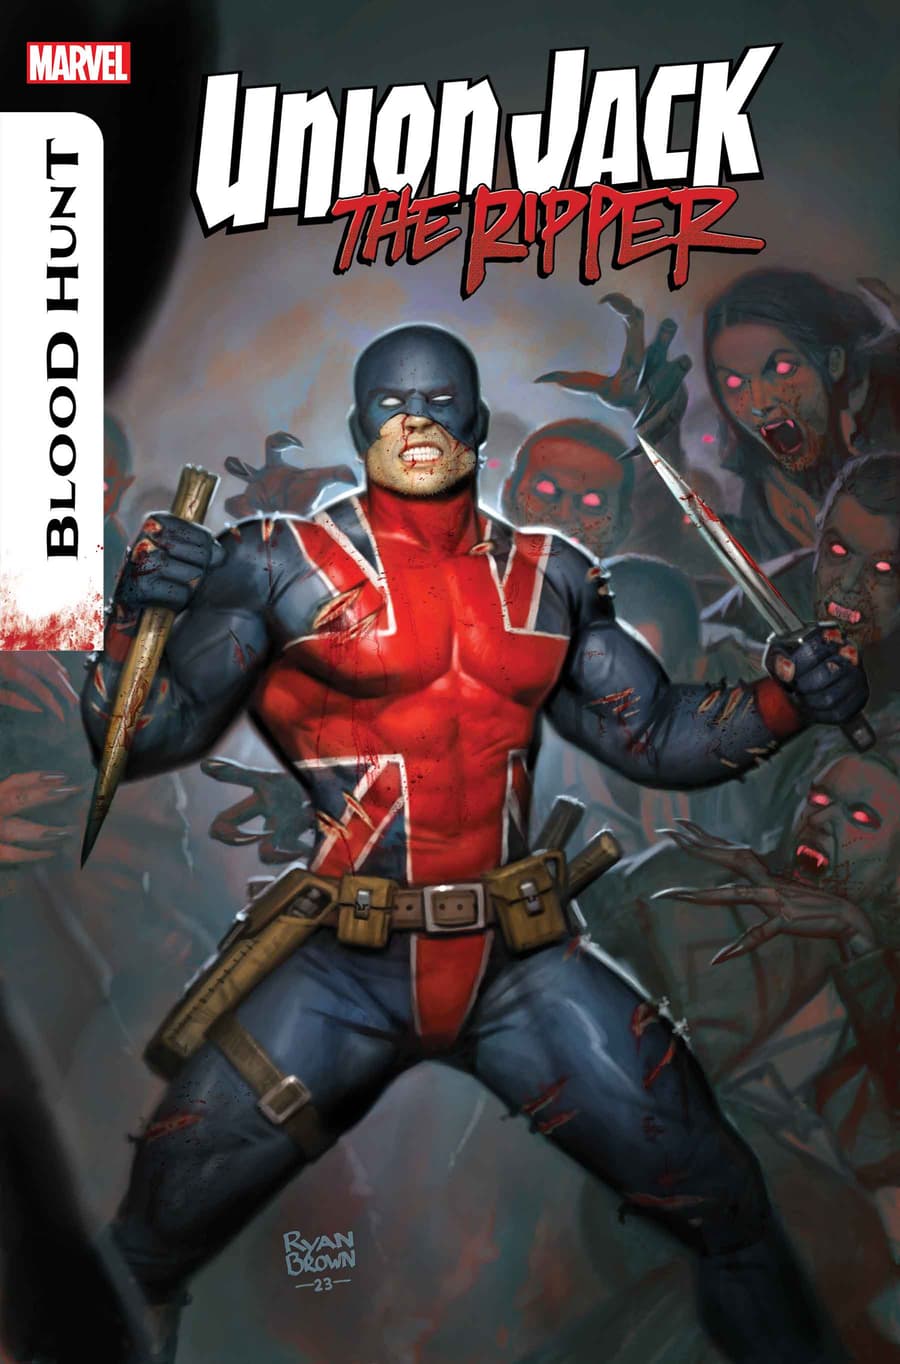 Union Jack the Ripper: Blood Hunt #1 cover art